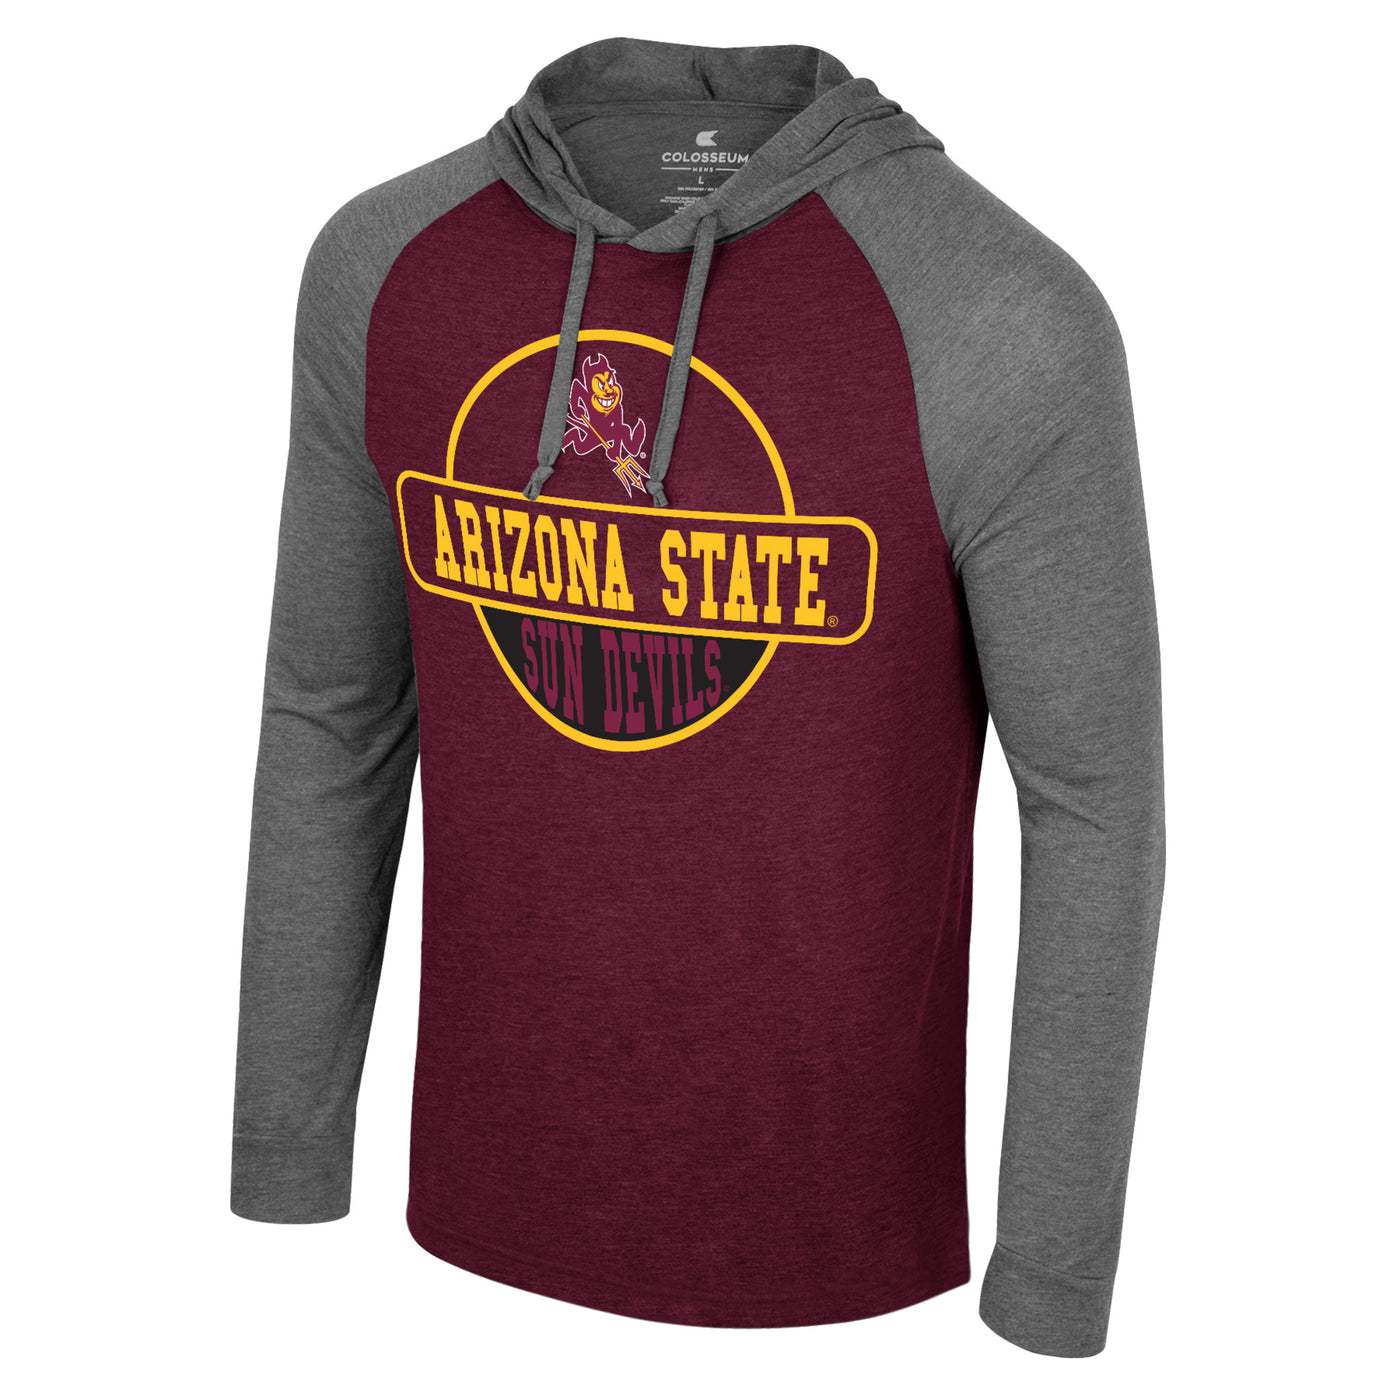 Asu maroon hood with grey sleeves and hood. In the center there is a gold outline of a circle with a sparky mascot inside. There is a gold outline of a round rectangle overlapping the circle with the gold text 